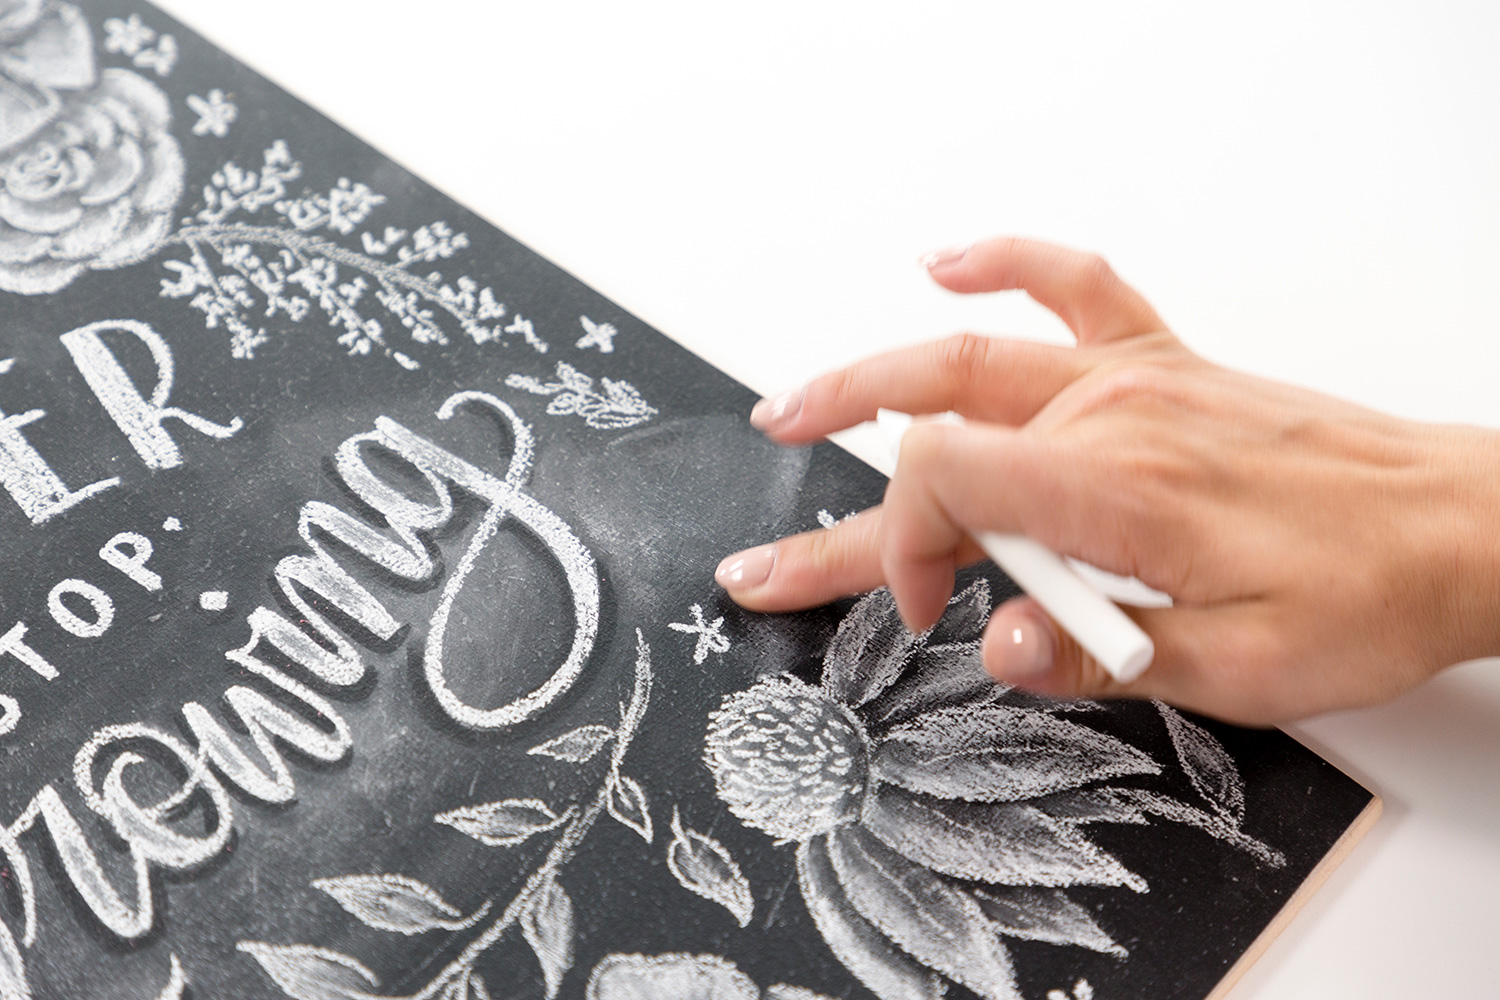 Intro to Chalk Illustration Online Class with Valerie McKeehan! Learn how to draw beautiful flowers in chalk and make a sign!